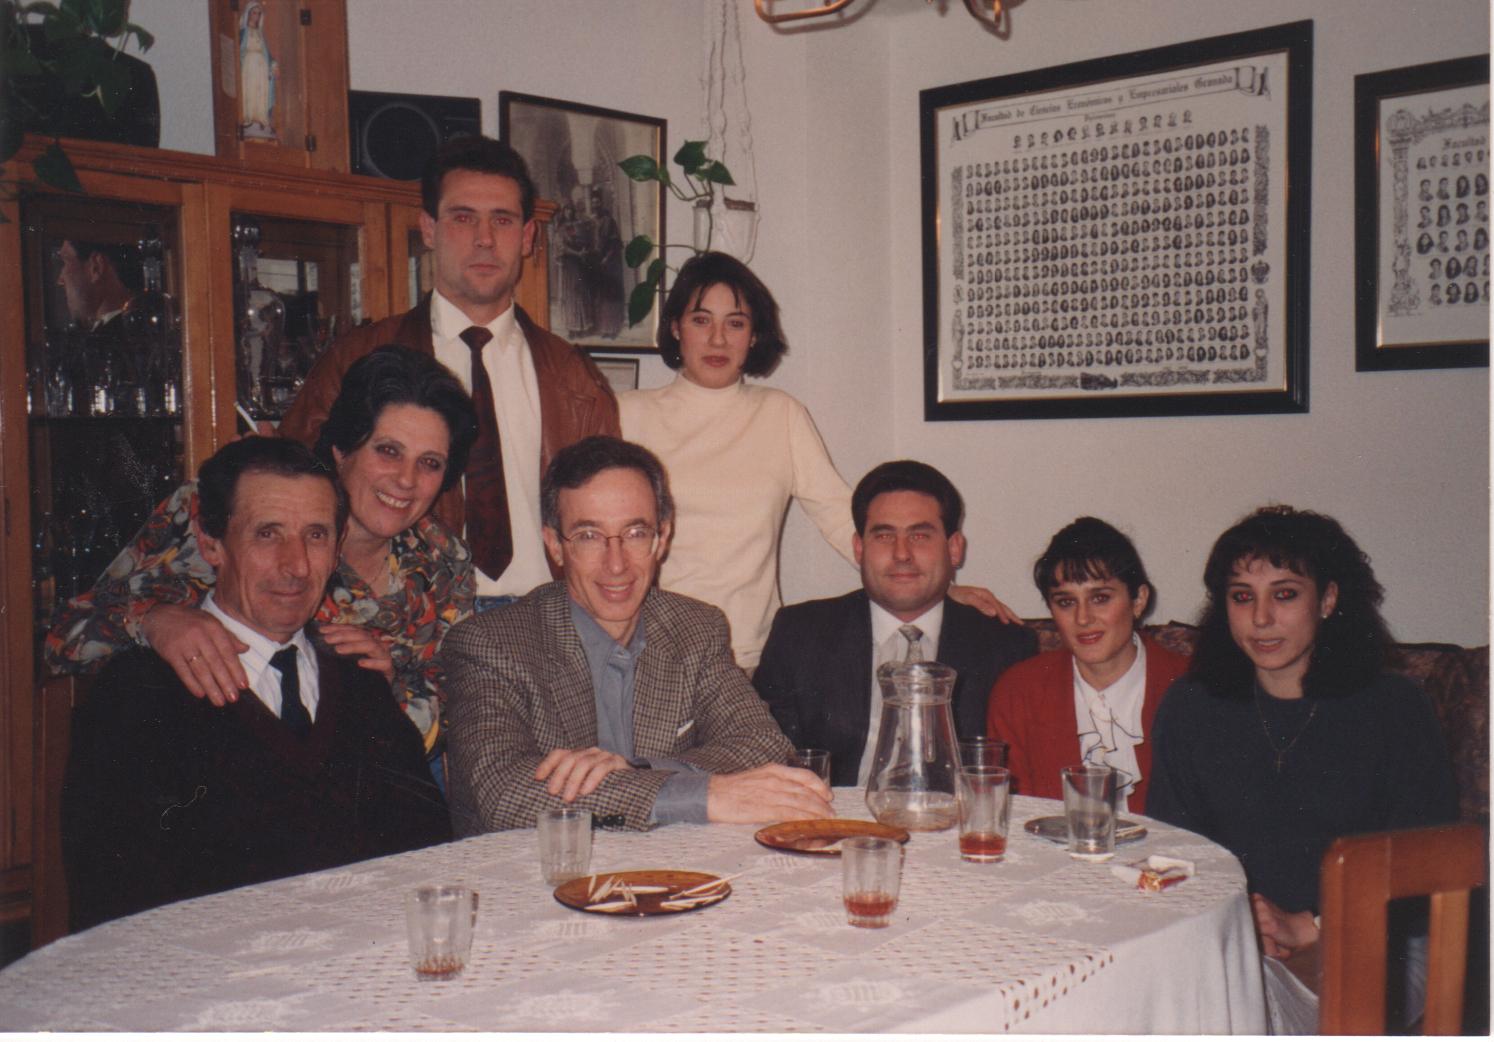 A group of people in semi-formal attire pose behind a dining table.